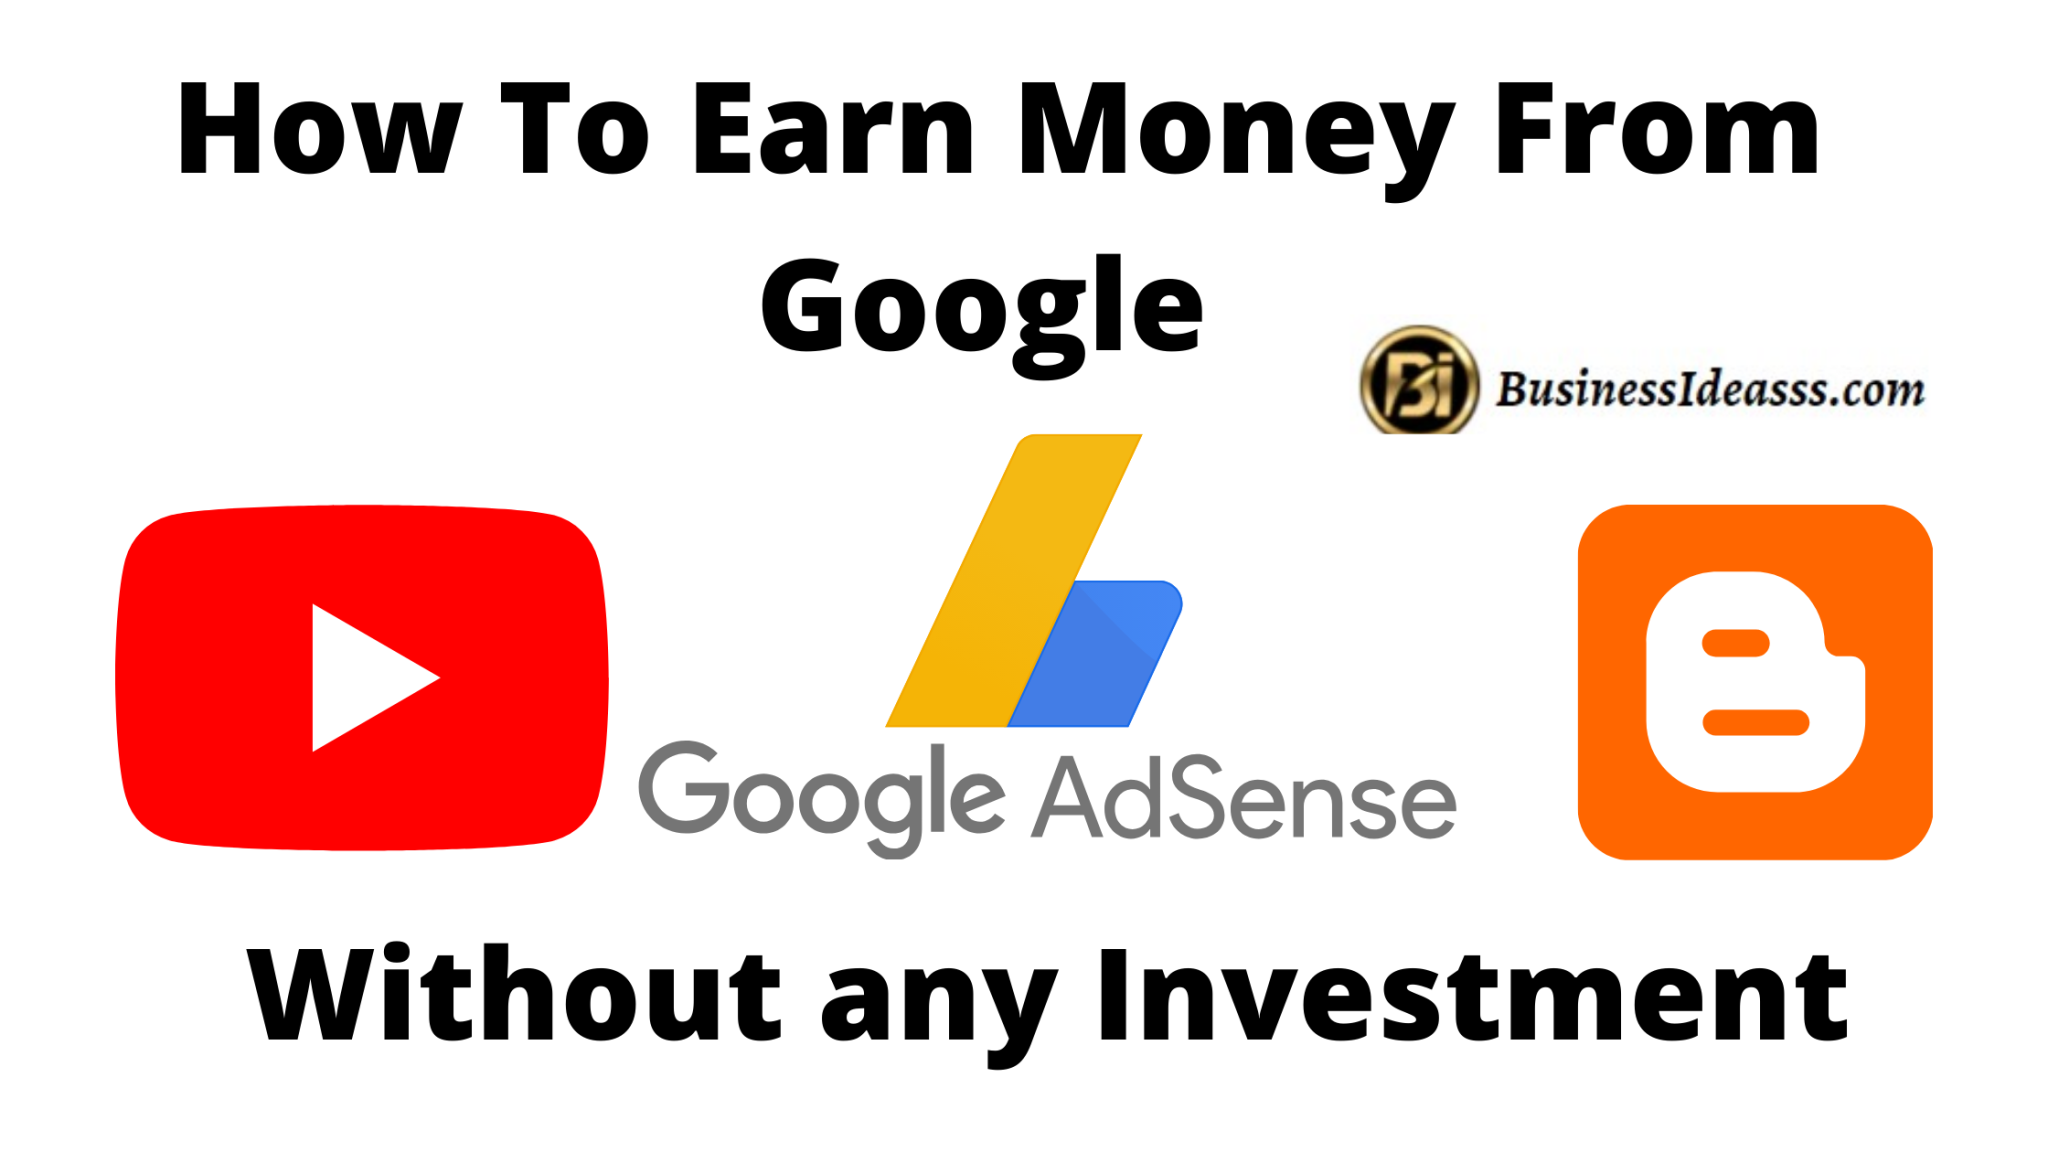 How to earn money from Google, know the easiest ways